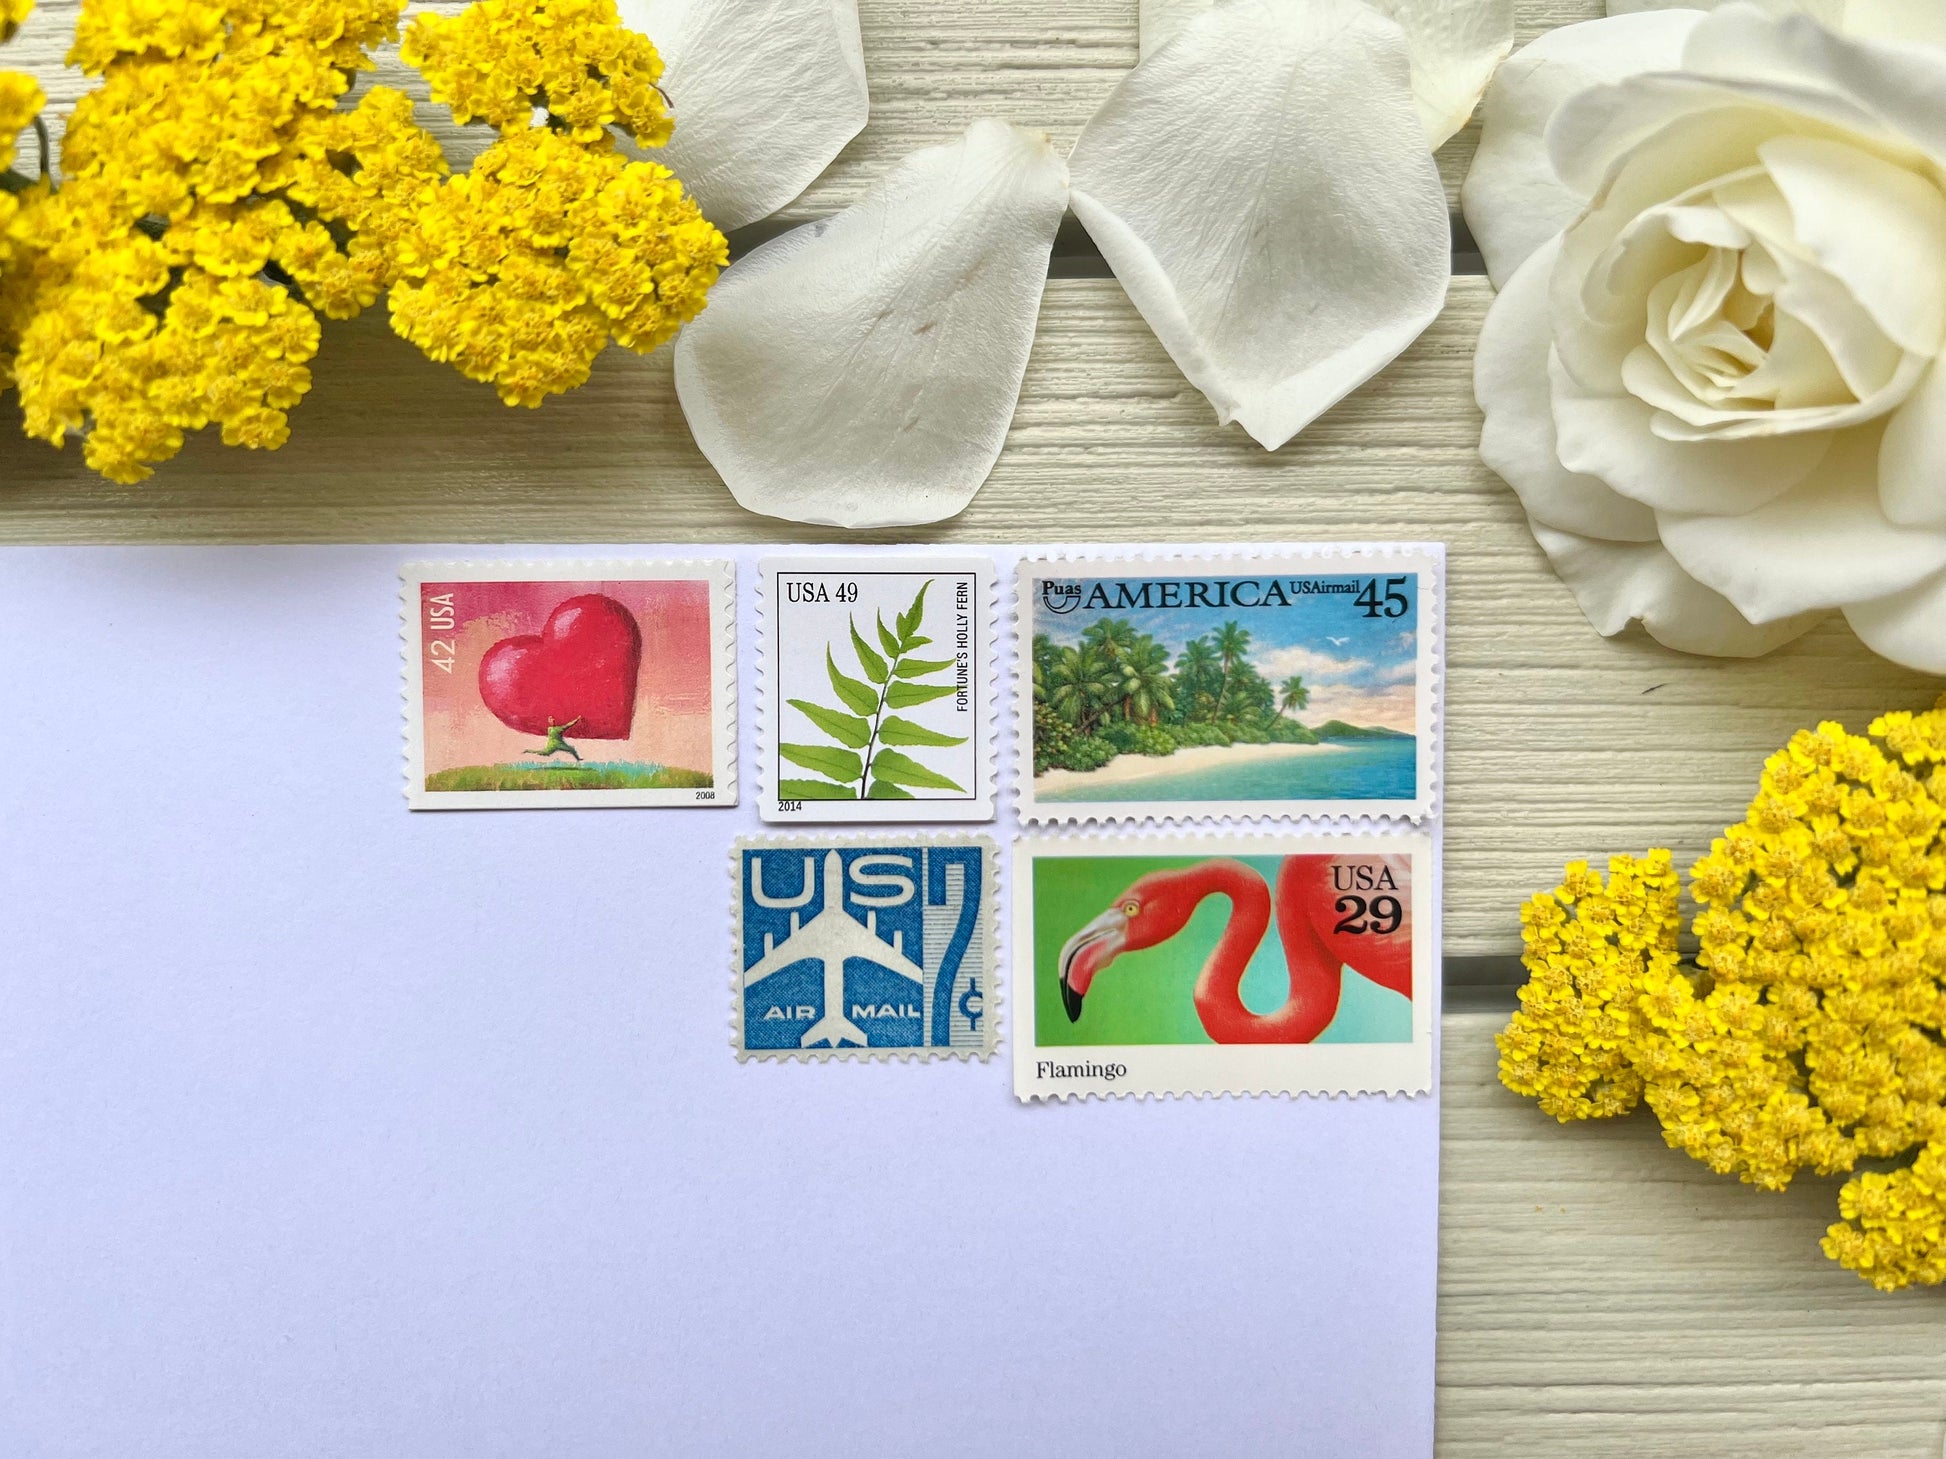 Beach Wedding Postage Stamps - USPS stamps for Destination Wedding Invites  - Love, Travel, Heart, Floral, Palm Tree, Beach Themed